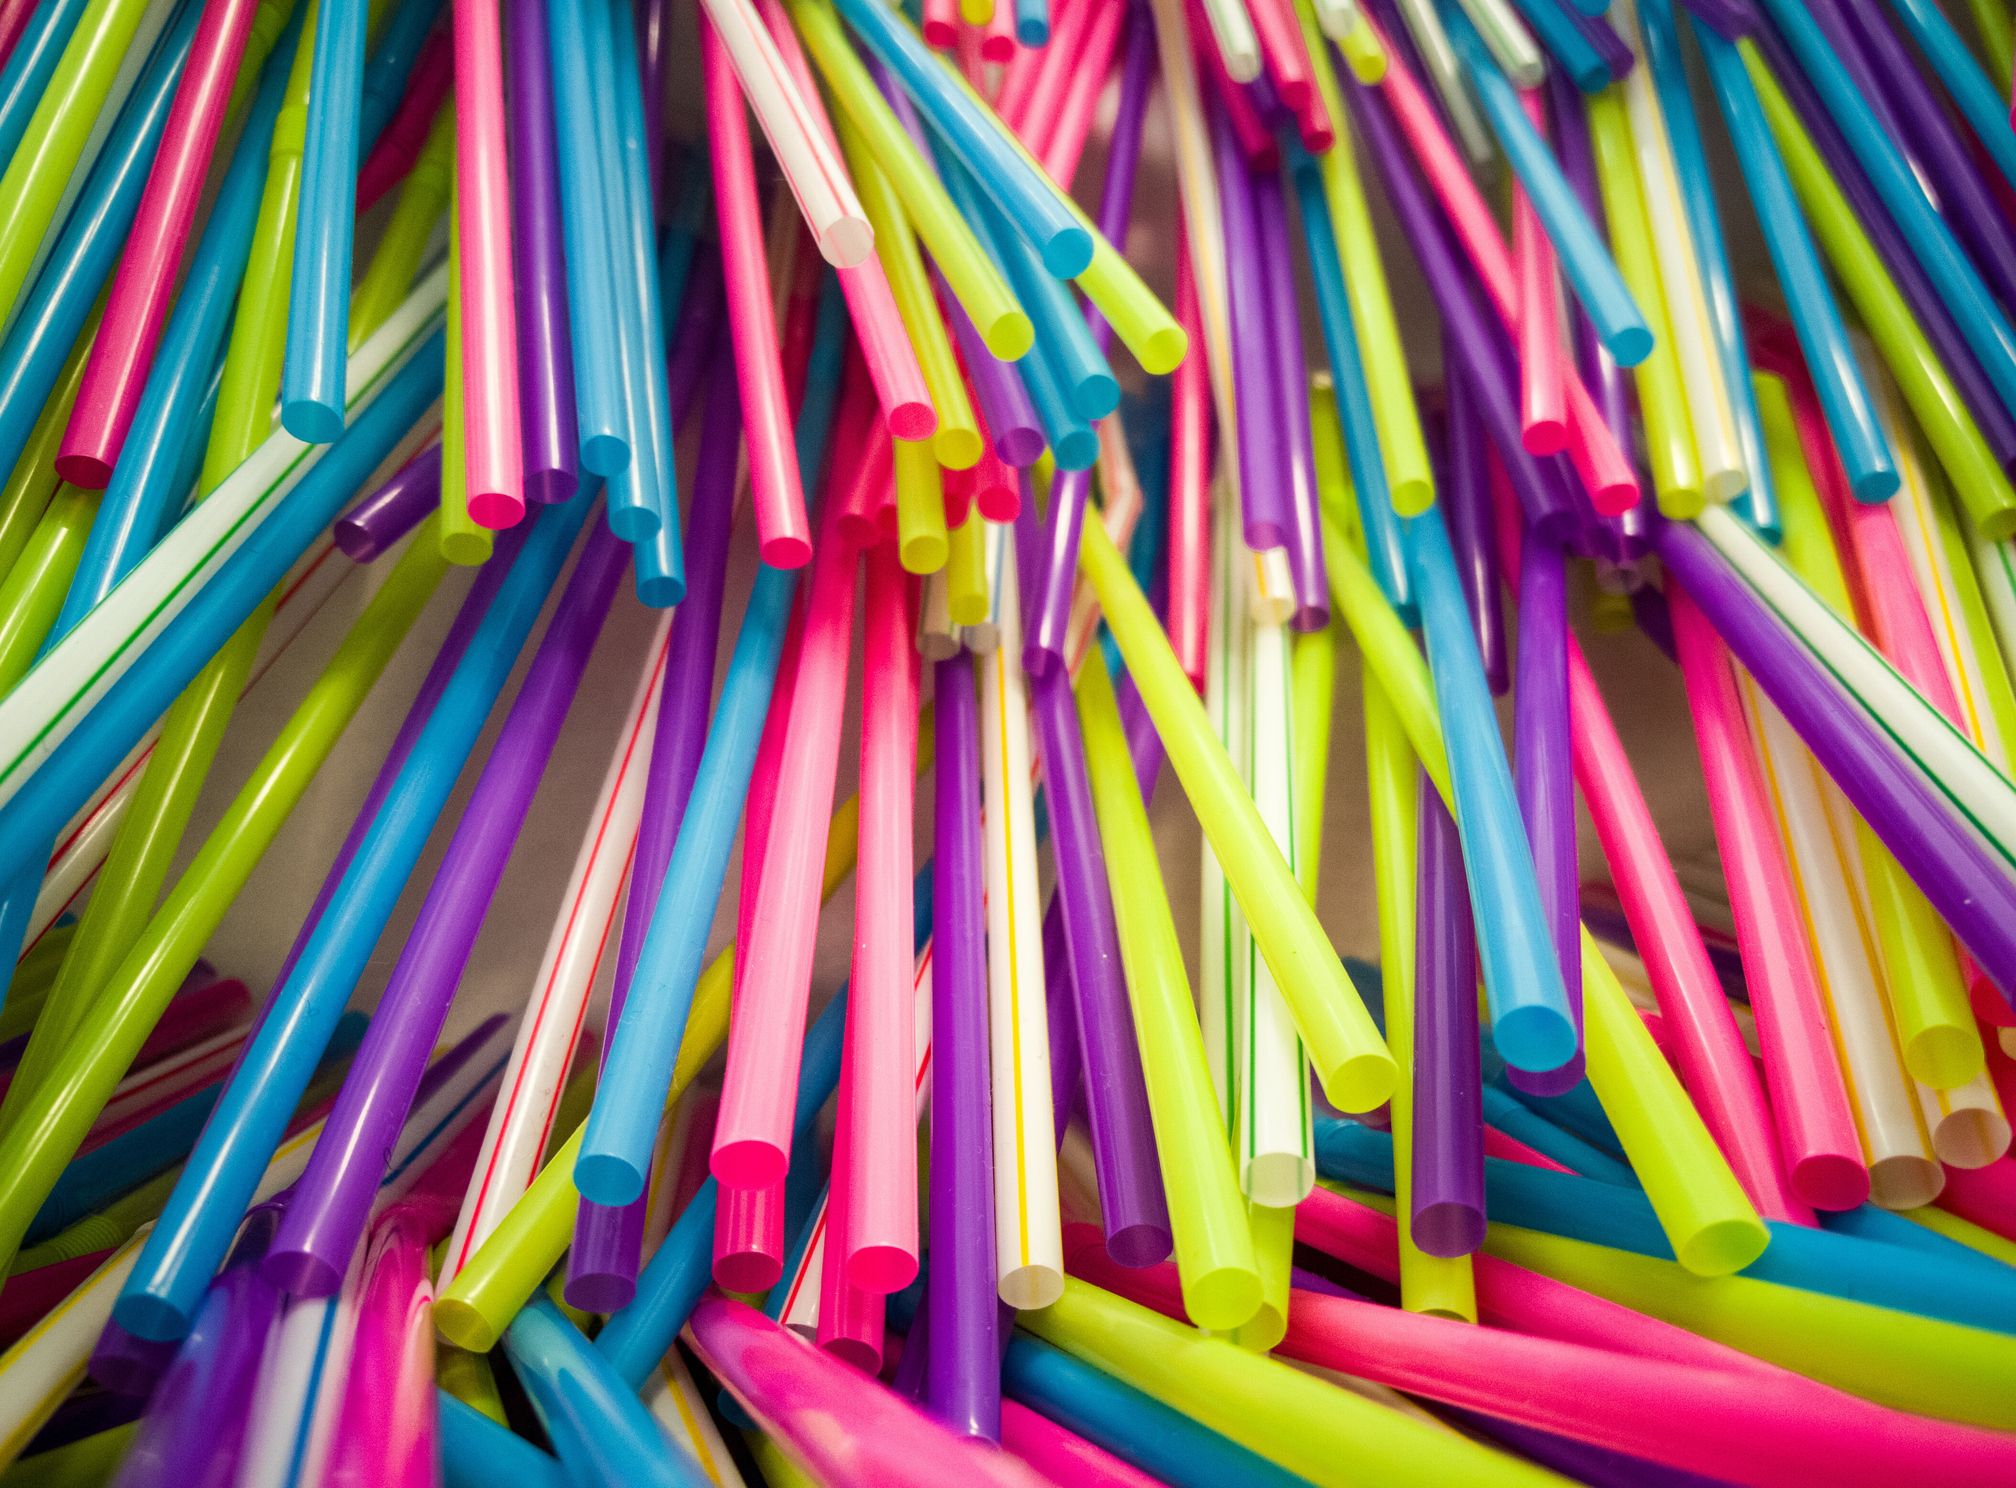 https://hips.hearstapps.com/hmg-prod/images/close-up-of-multi-colored-drinking-straws-royalty-free-image-654742629-1531498119.jpg